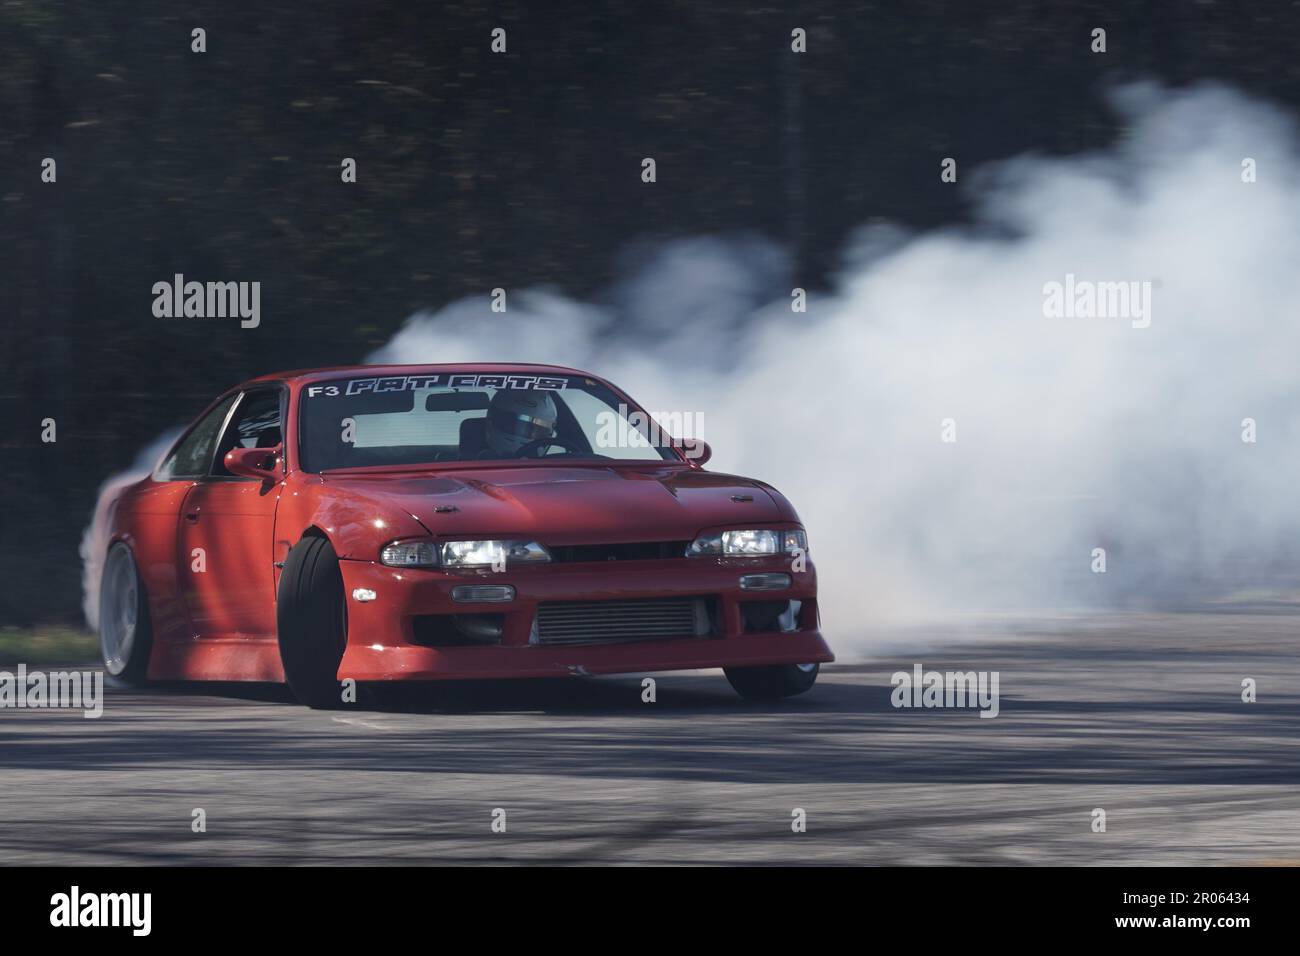 Red s14 mid drift with heavy throttle commitment creating tons of smoke. Stock Photo